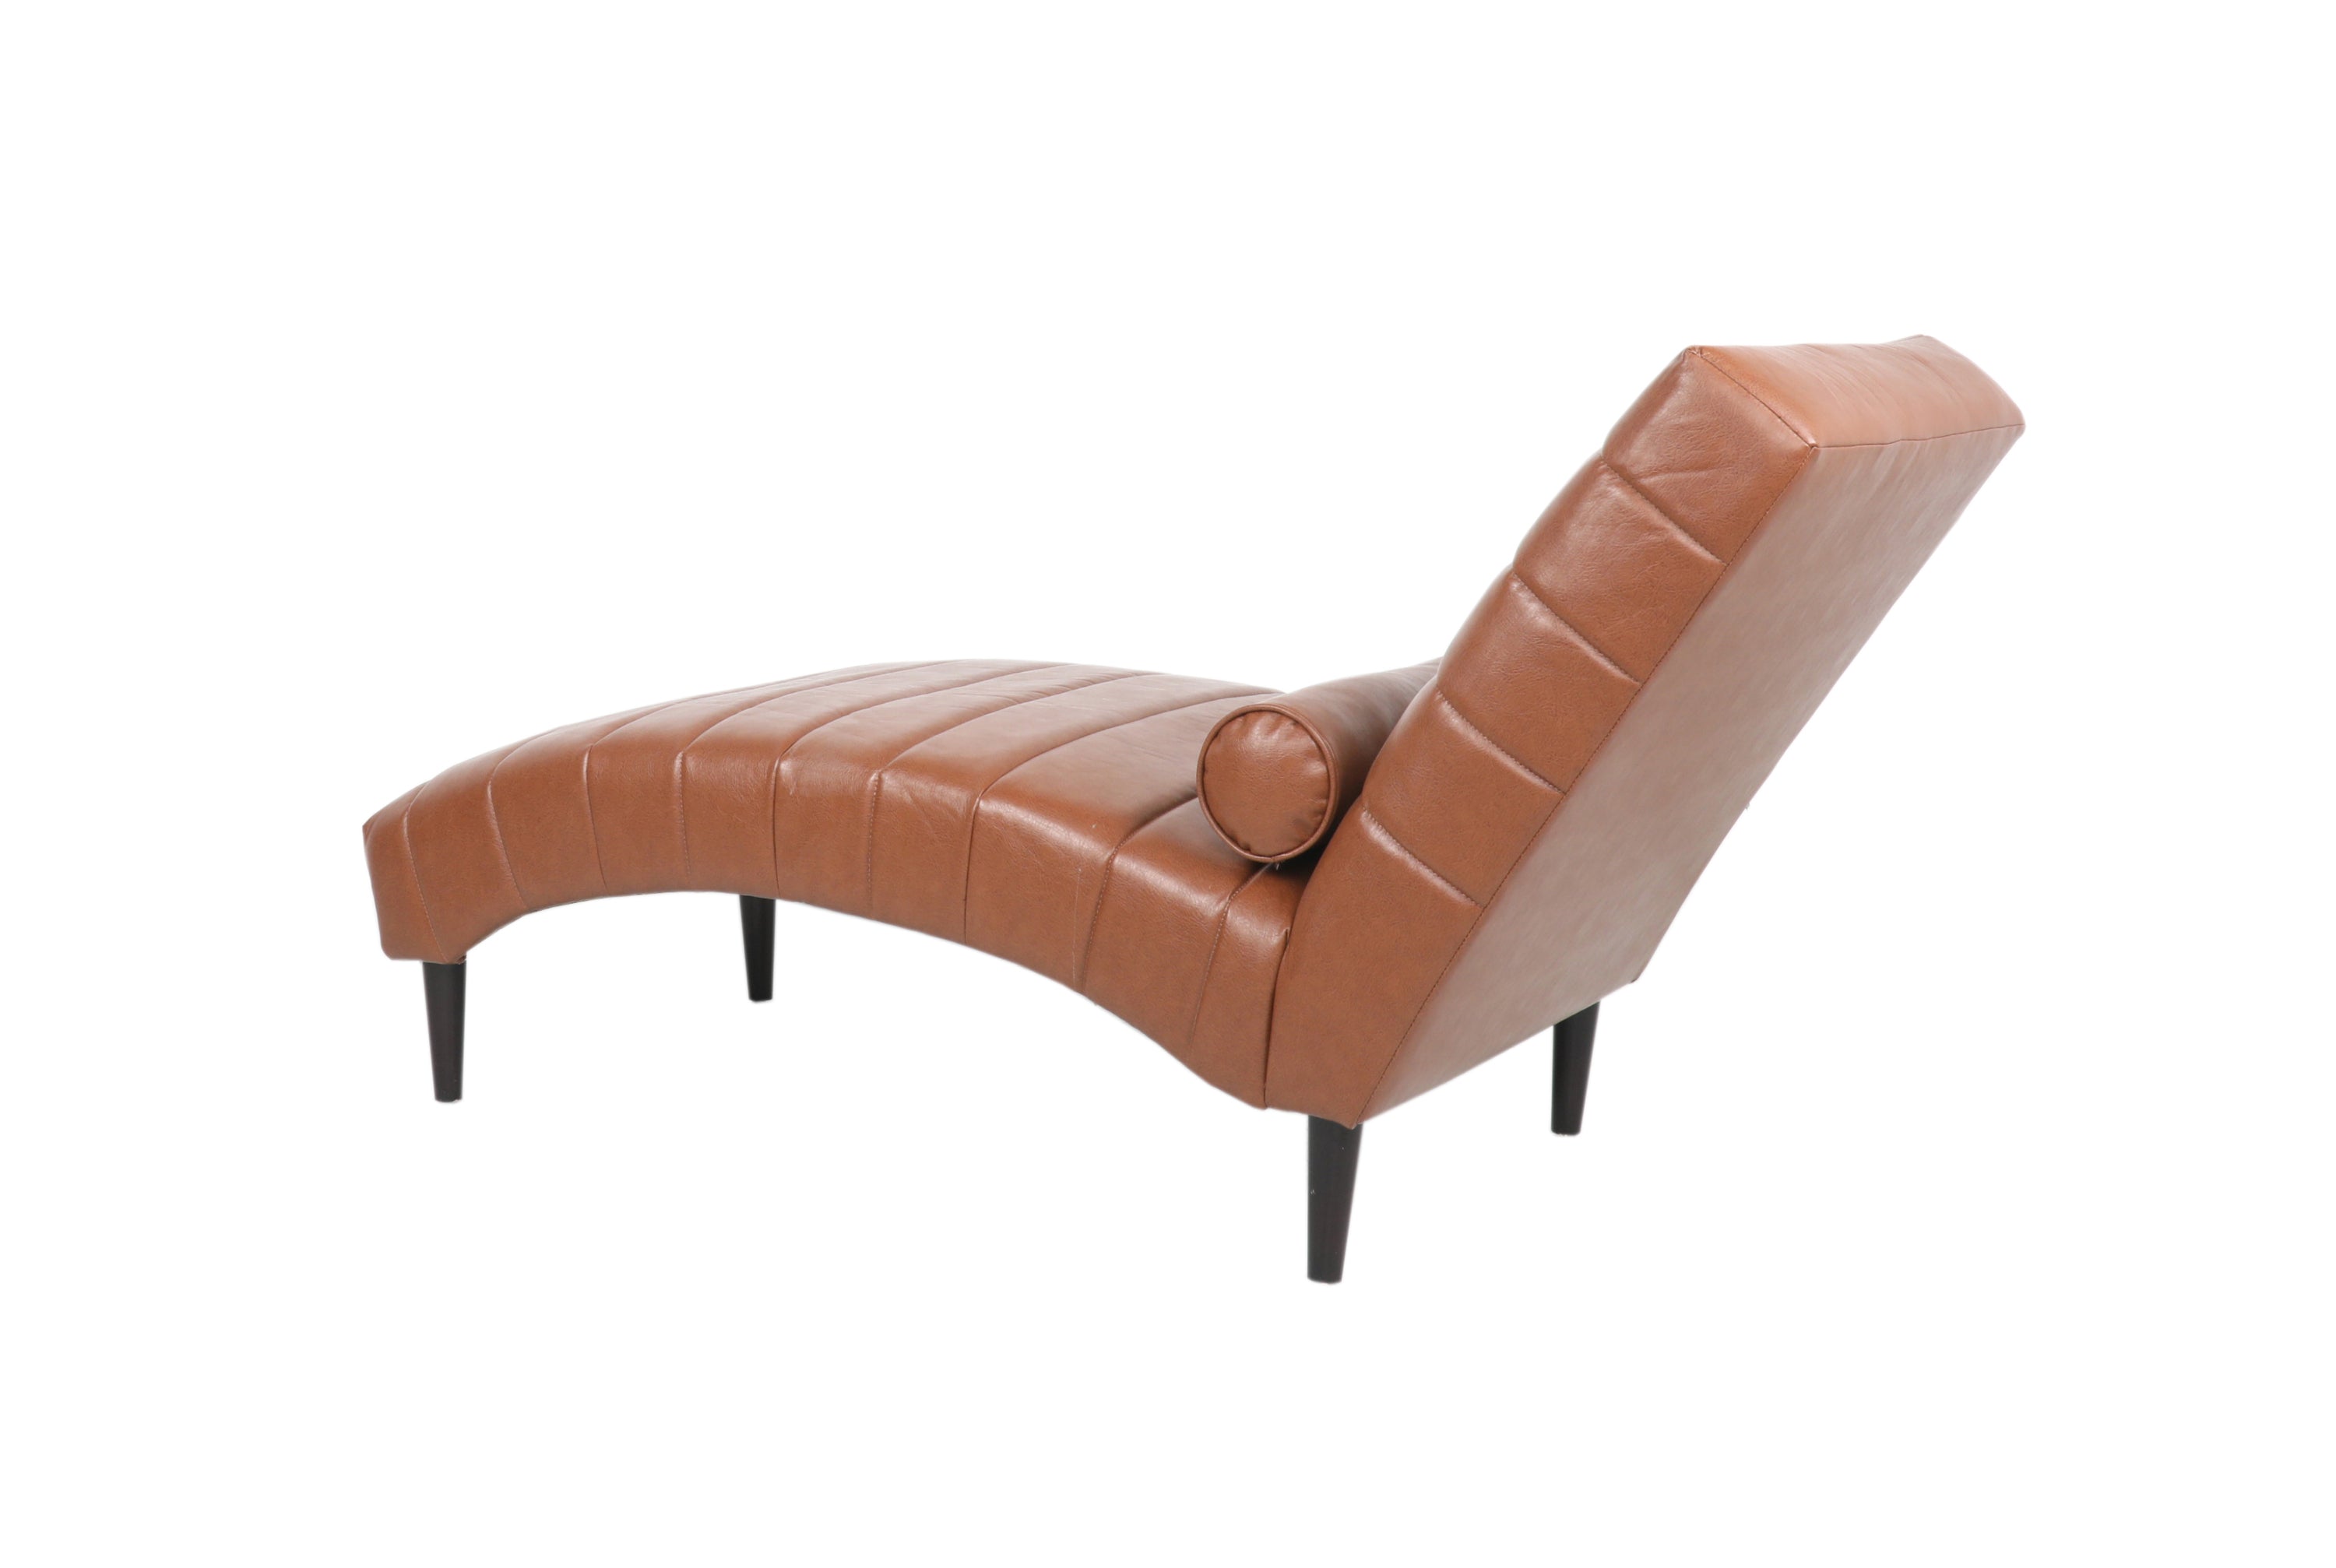 Modern Chaise Lounge for Bedroom,Office, Living Room with Luxury PU